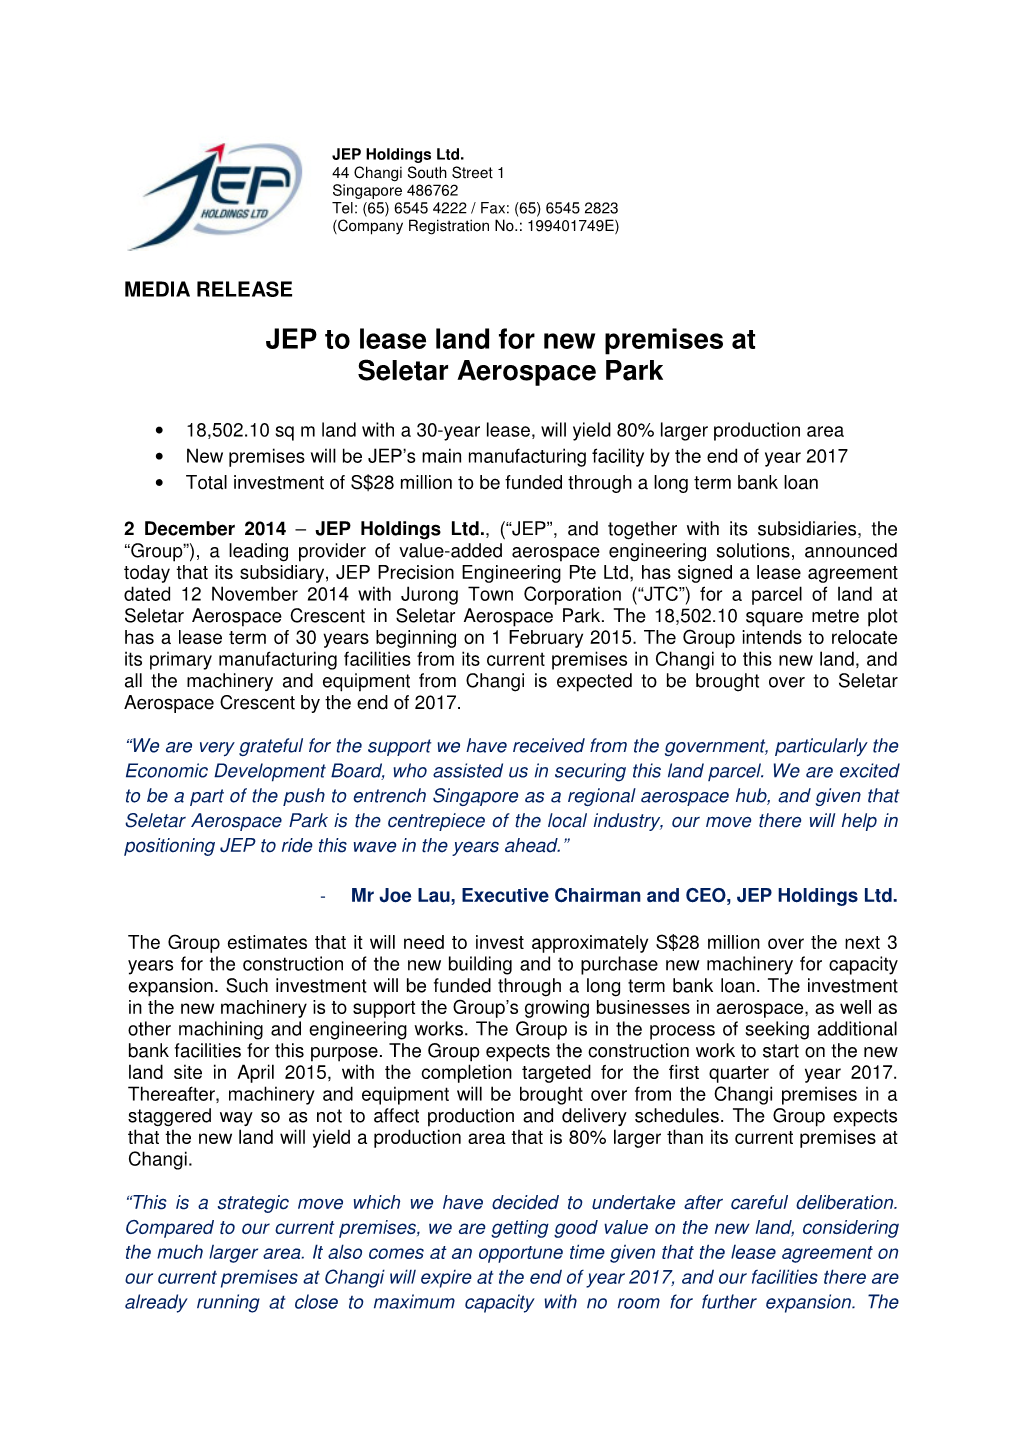 JEP to Lease Land for New Premises at Seletar Aerospace Park